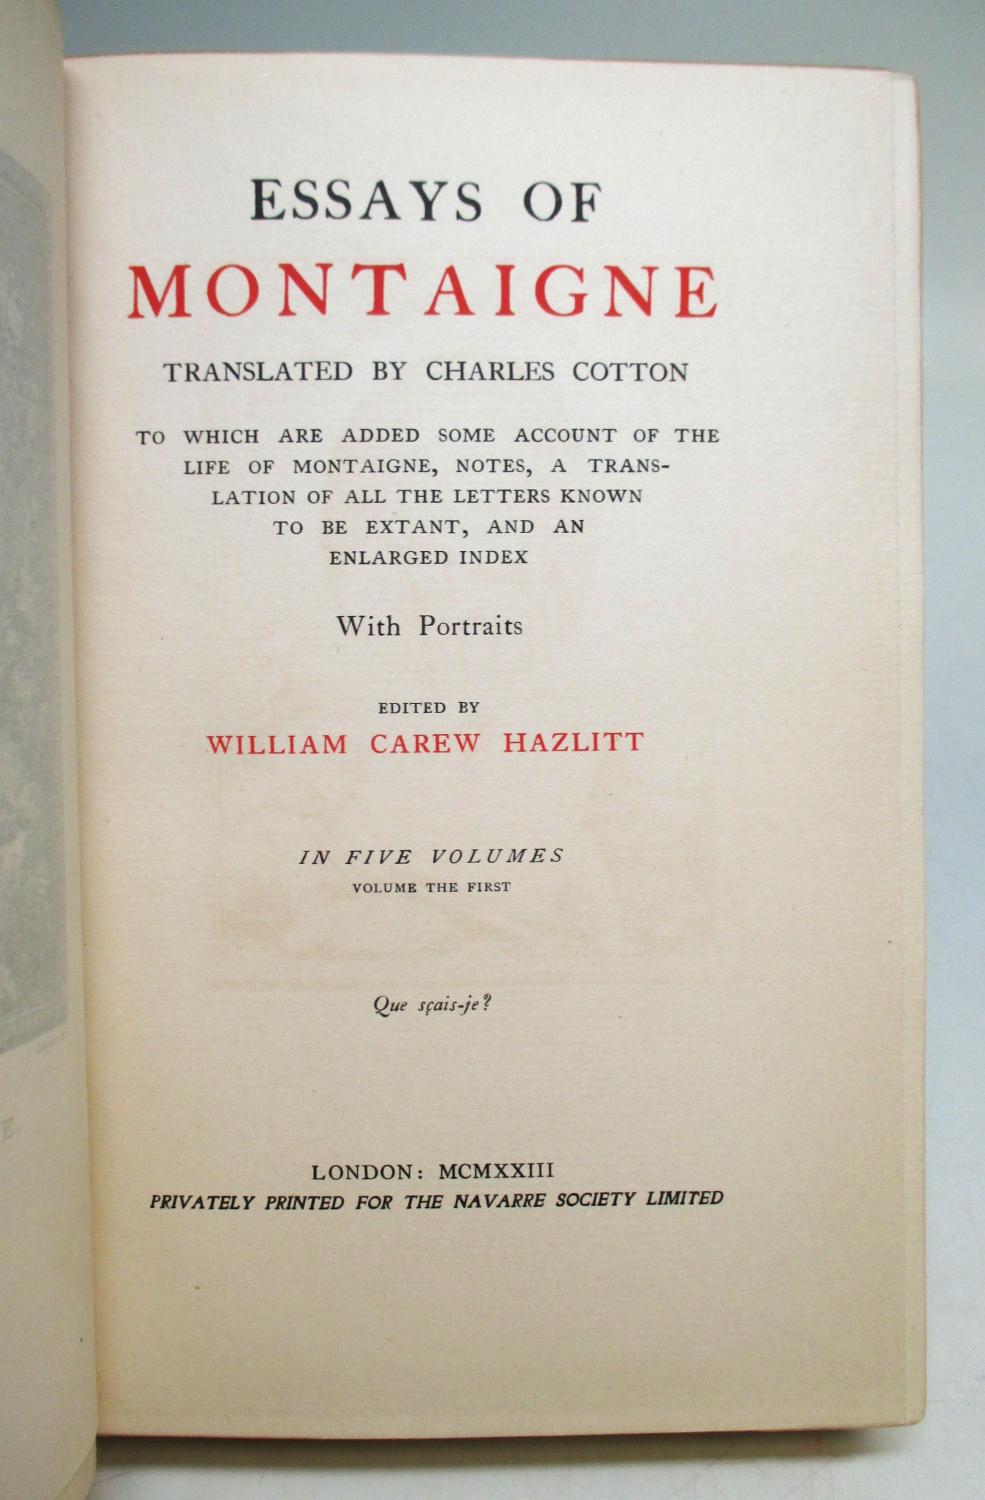 what are the best essays of montaigne